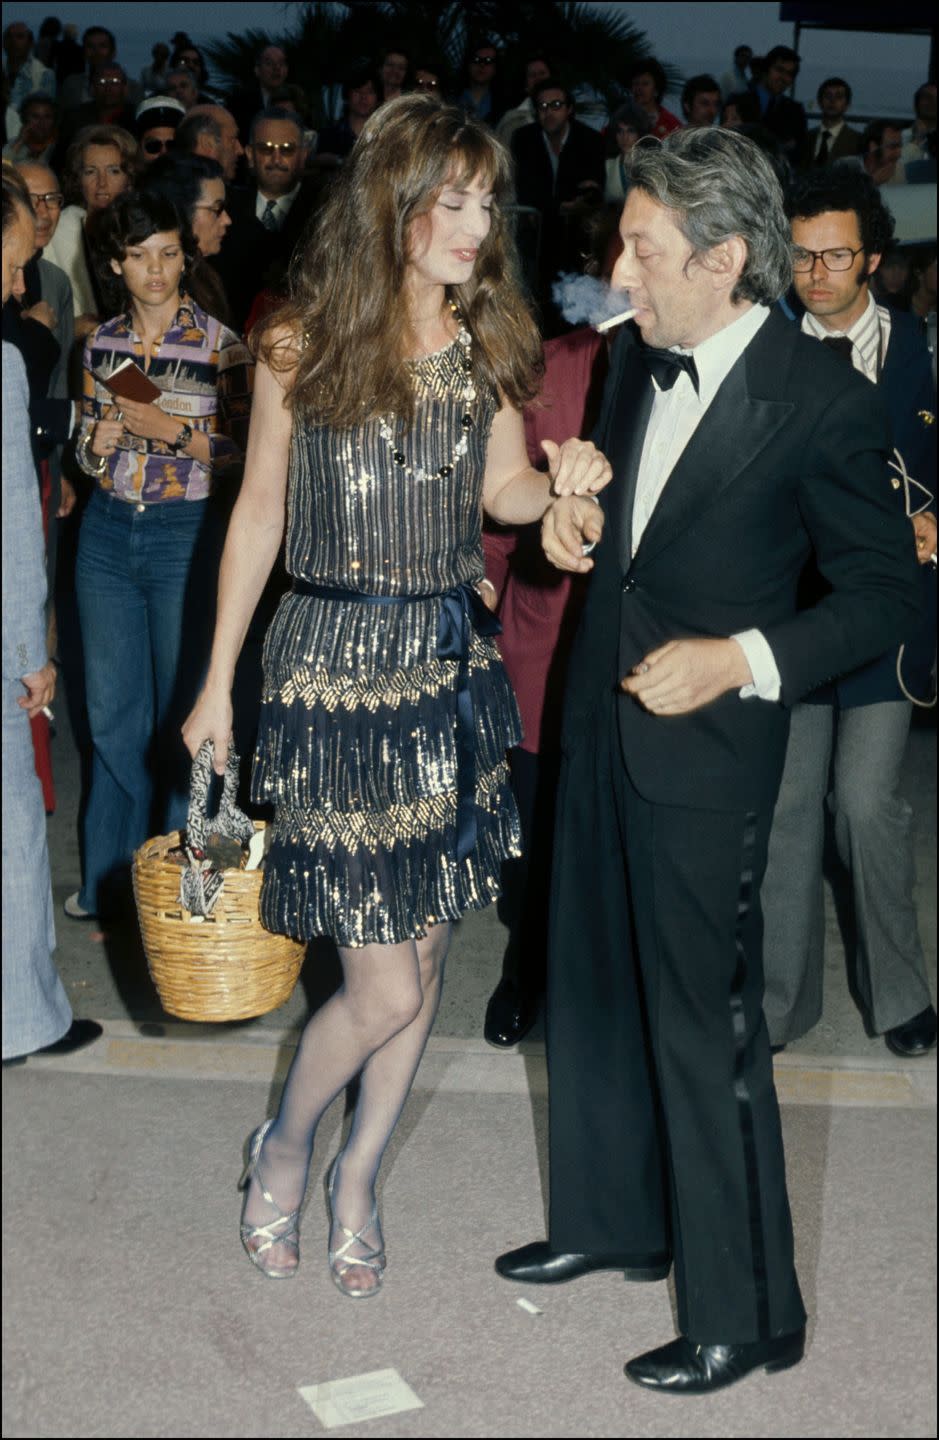 serge gainsbourg and jane birkin at cannes film festivals, france on may 15, 1974